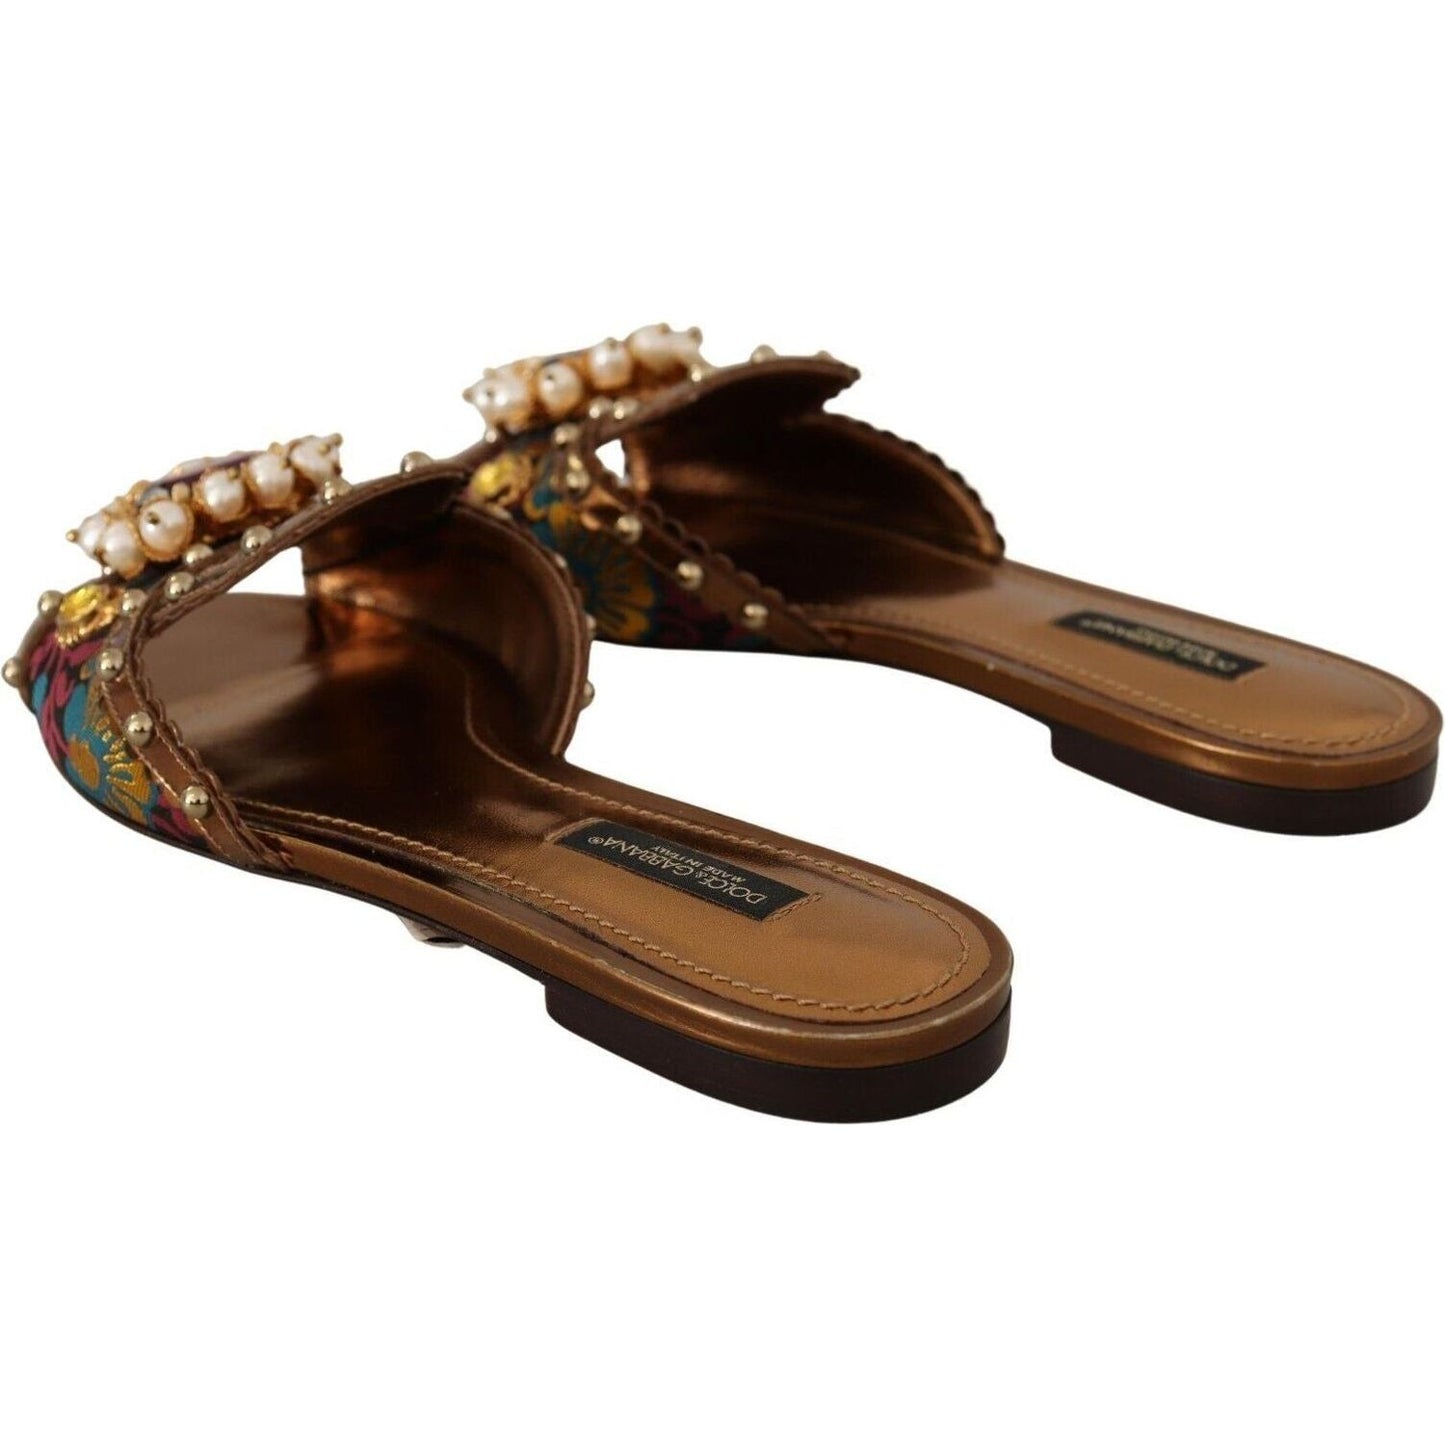 Dolce & Gabbana Chic Floral Print Flat Sandals with Faux Pearl Detail multicolor-floral-embellished-slides-flats-shoes